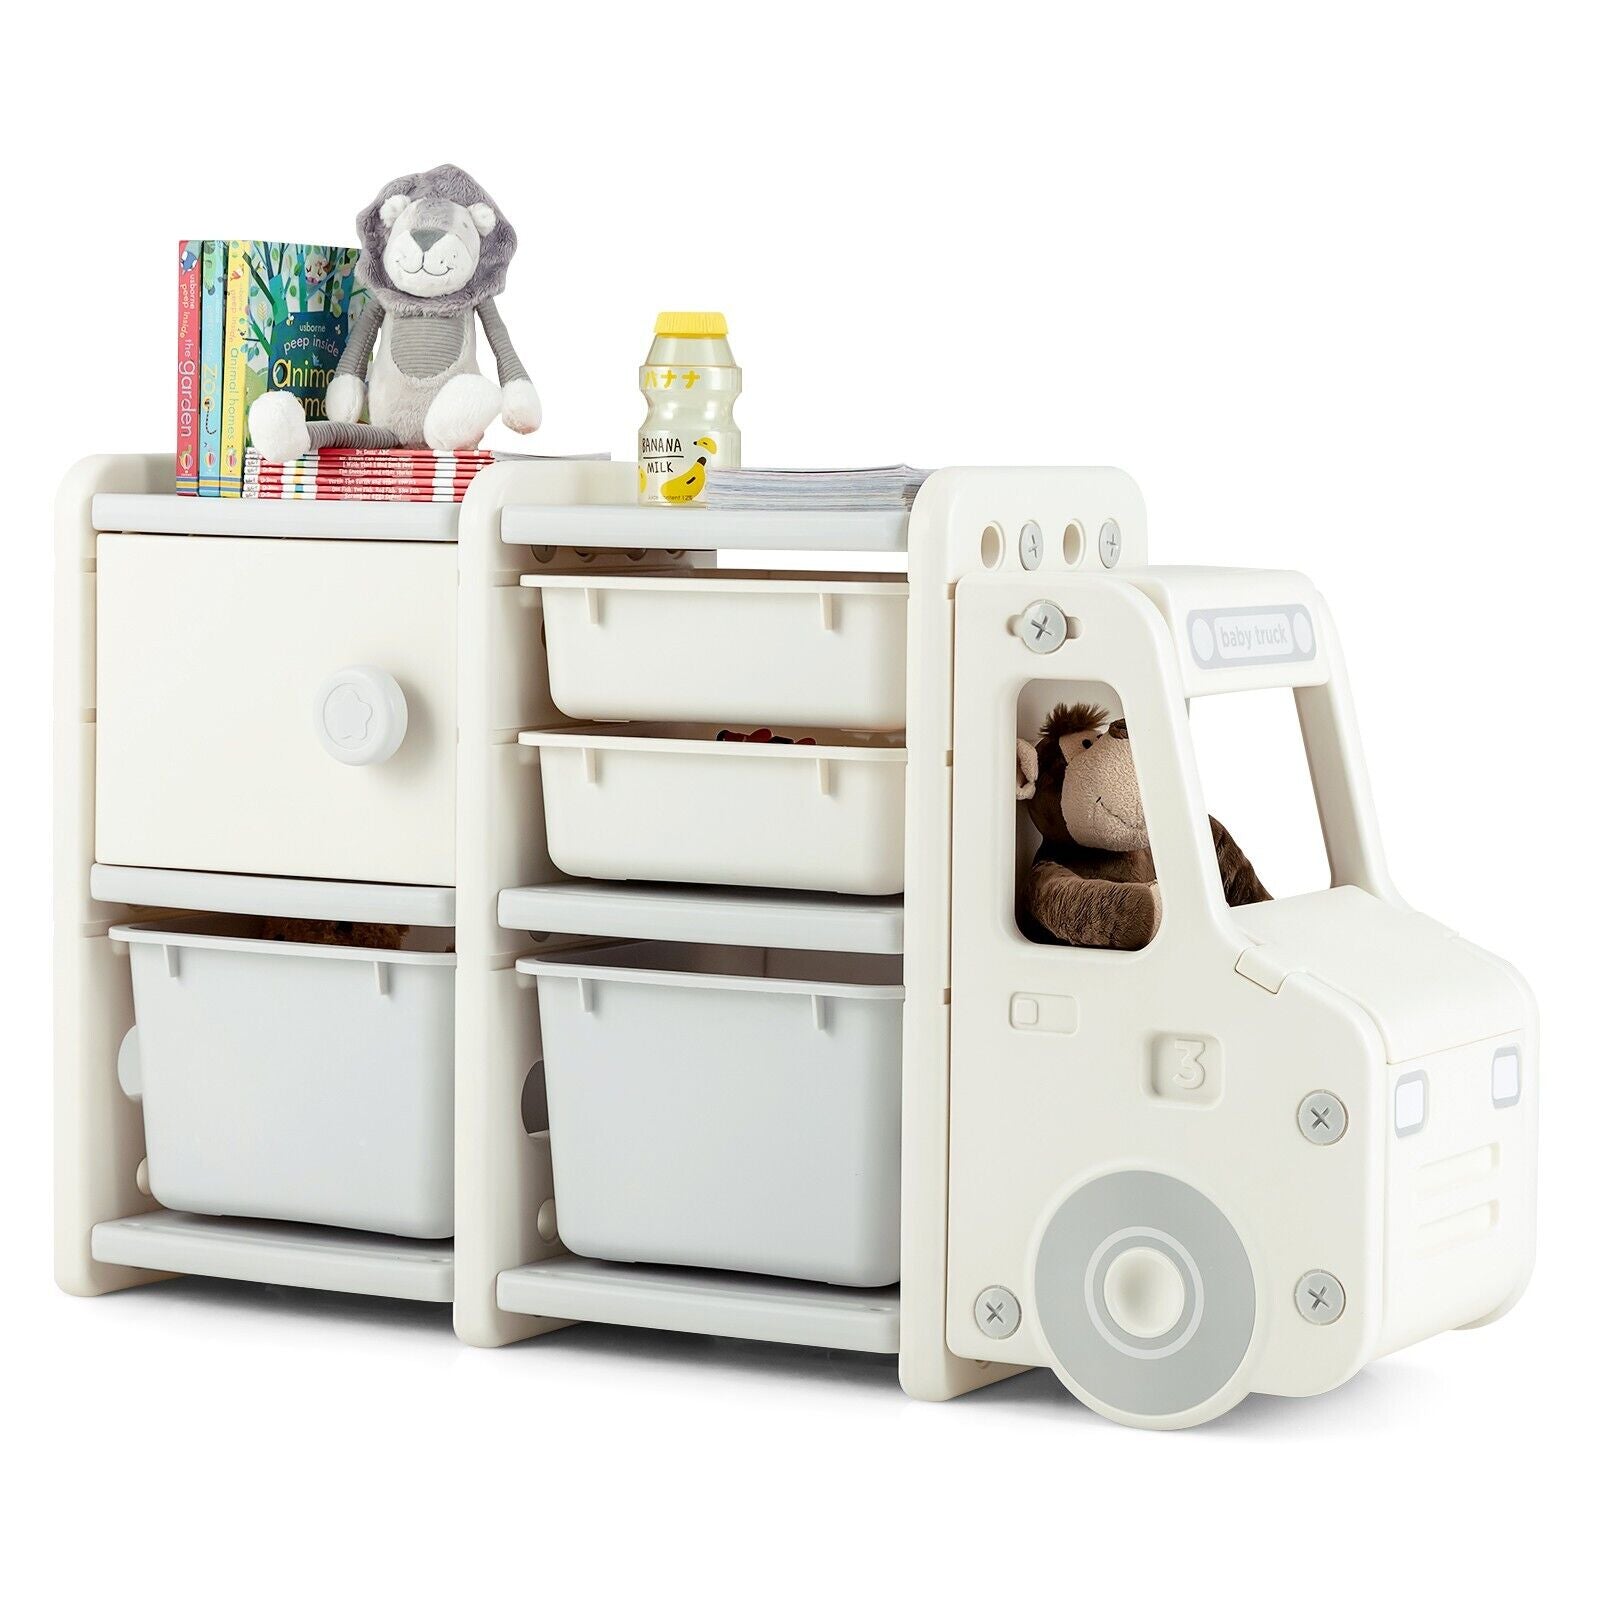 Kids Storage Units with 2 Plastic Bins and 2 Drawers